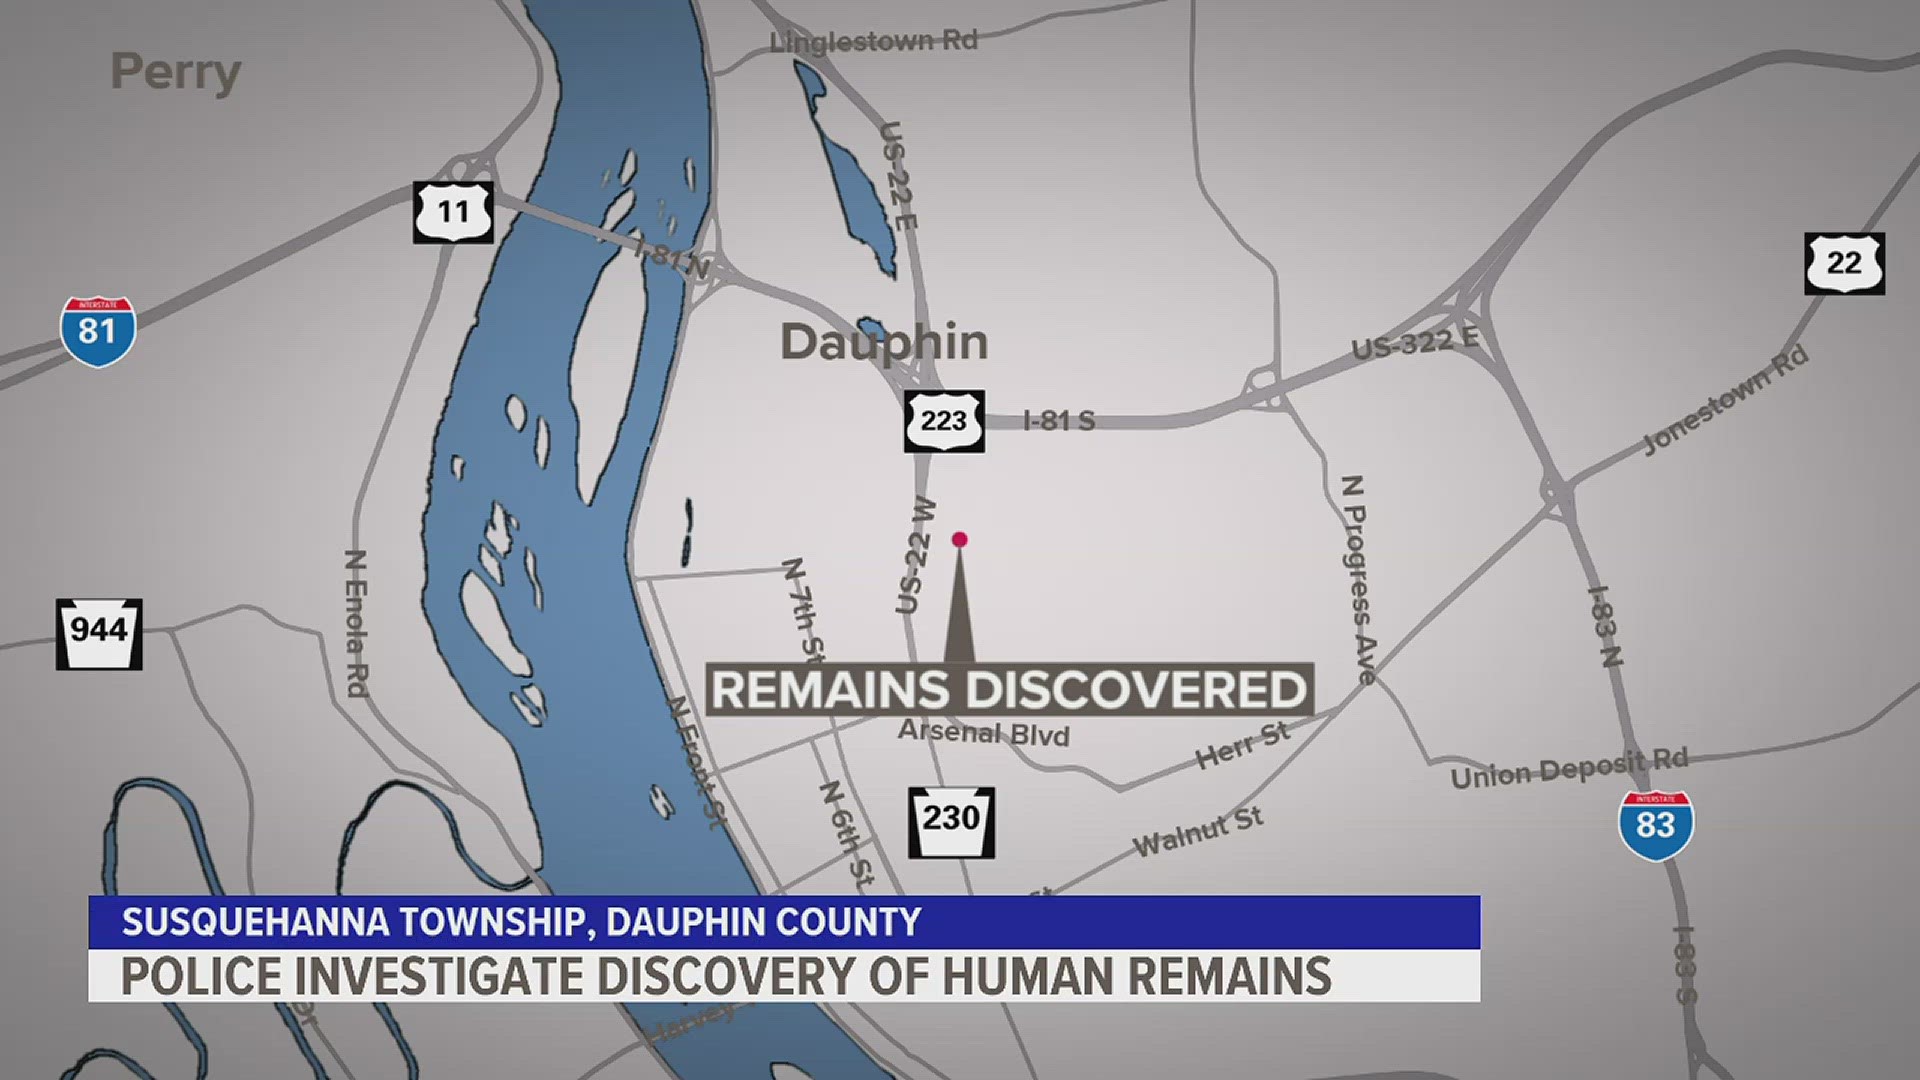 Susquehanna Township Police discovered remnants of human remains on the 1300 block of Crooked Hill Road at 1:30 p.m. on March 19.